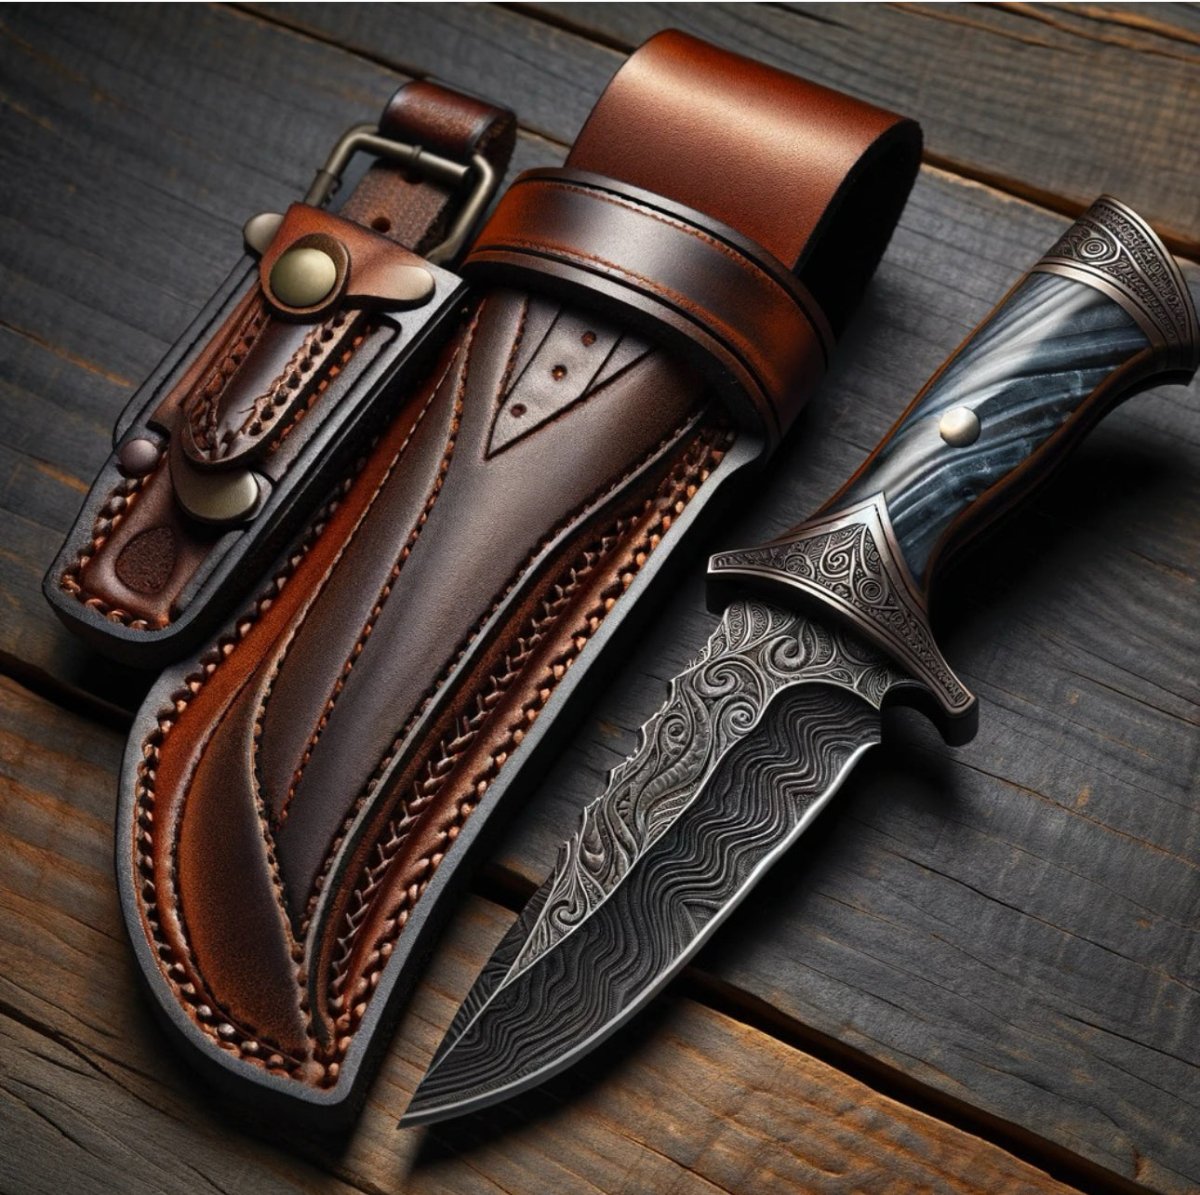 Finding the Best Hunting Knife: A Buyer’s Guide by Experienced Knifemaker - Shokunin USA